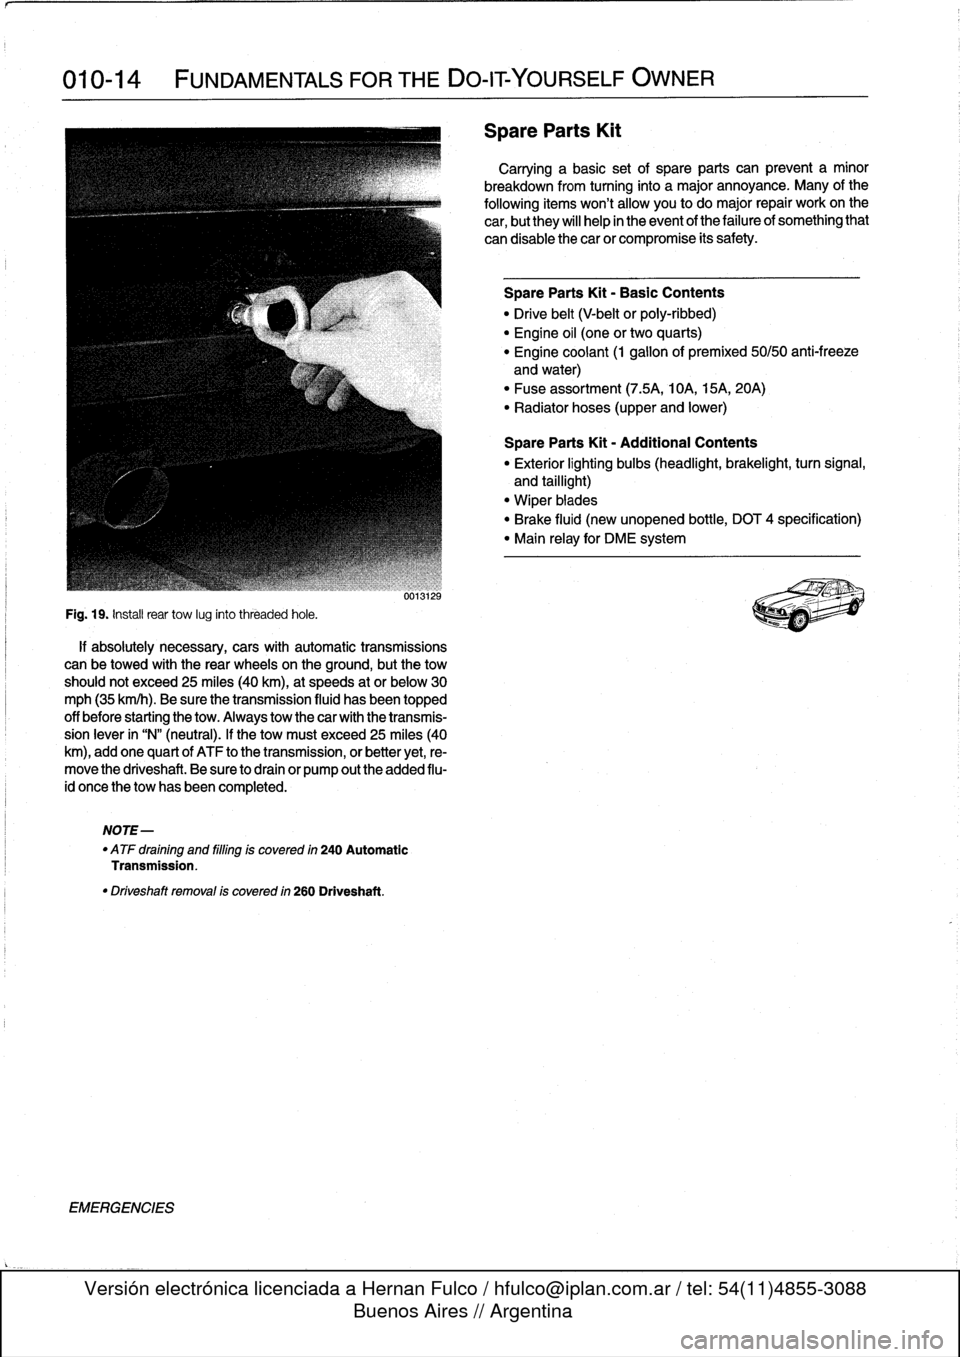 BMW 328i 1997 E36 Workshop Manual 
010-14

	

FUNDAMENTALS
FOR
THE
DO-ITYOURSELF
OWNER

Fig
.
19
.
Instaf
rear
tow
lug
into
threaded
hole
.

if
absolutely
necessary,
cars
with
automatic
transmissions
can
be
towed
with
the
rear
wheels
